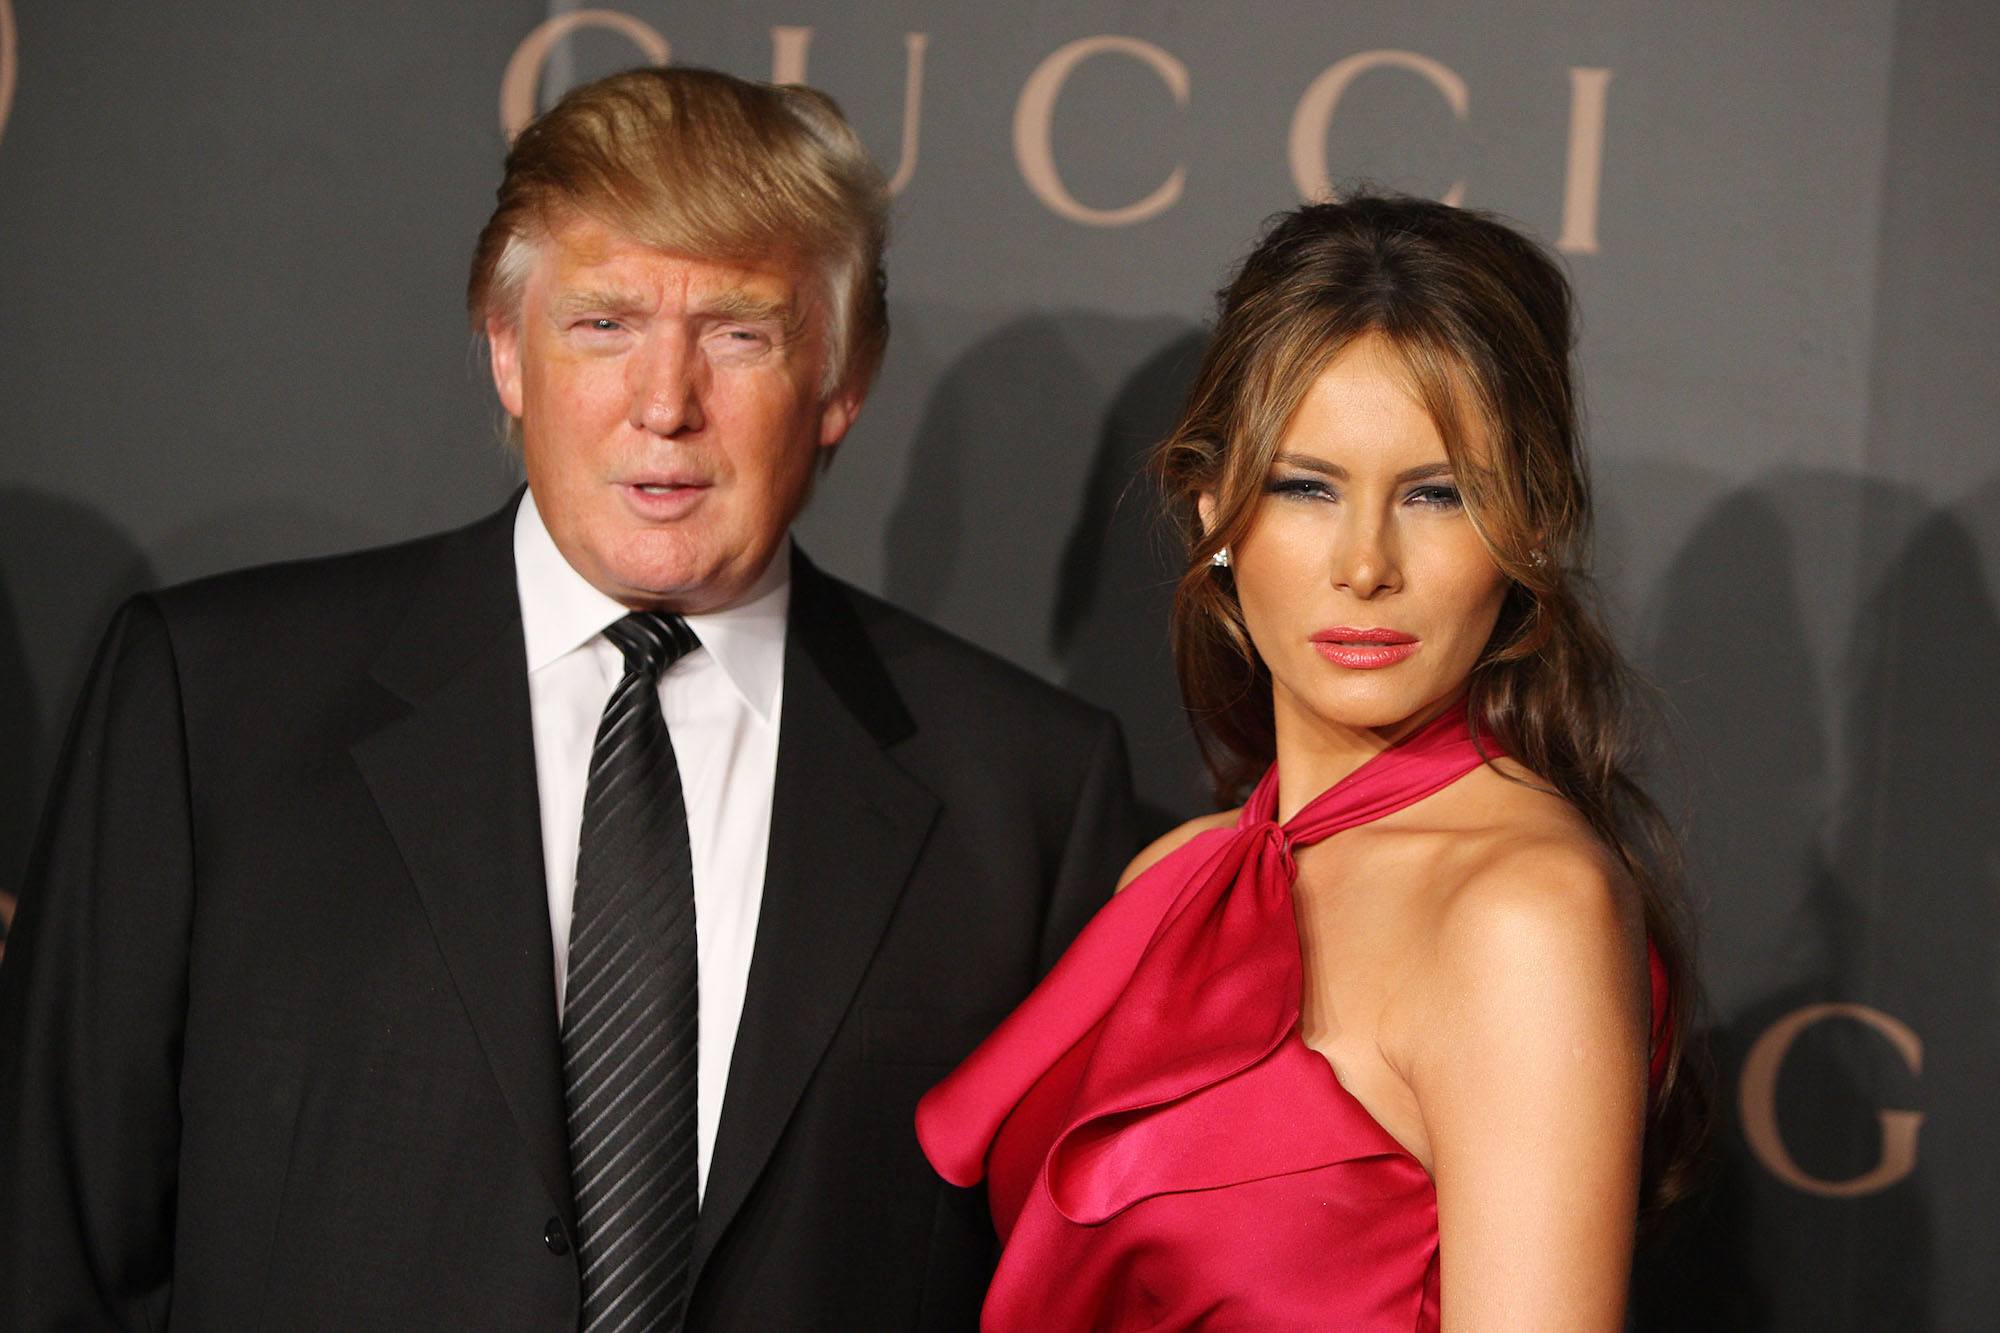 Donald Trump and Melania Trump attend a reception to benefit UNICEF in 2008